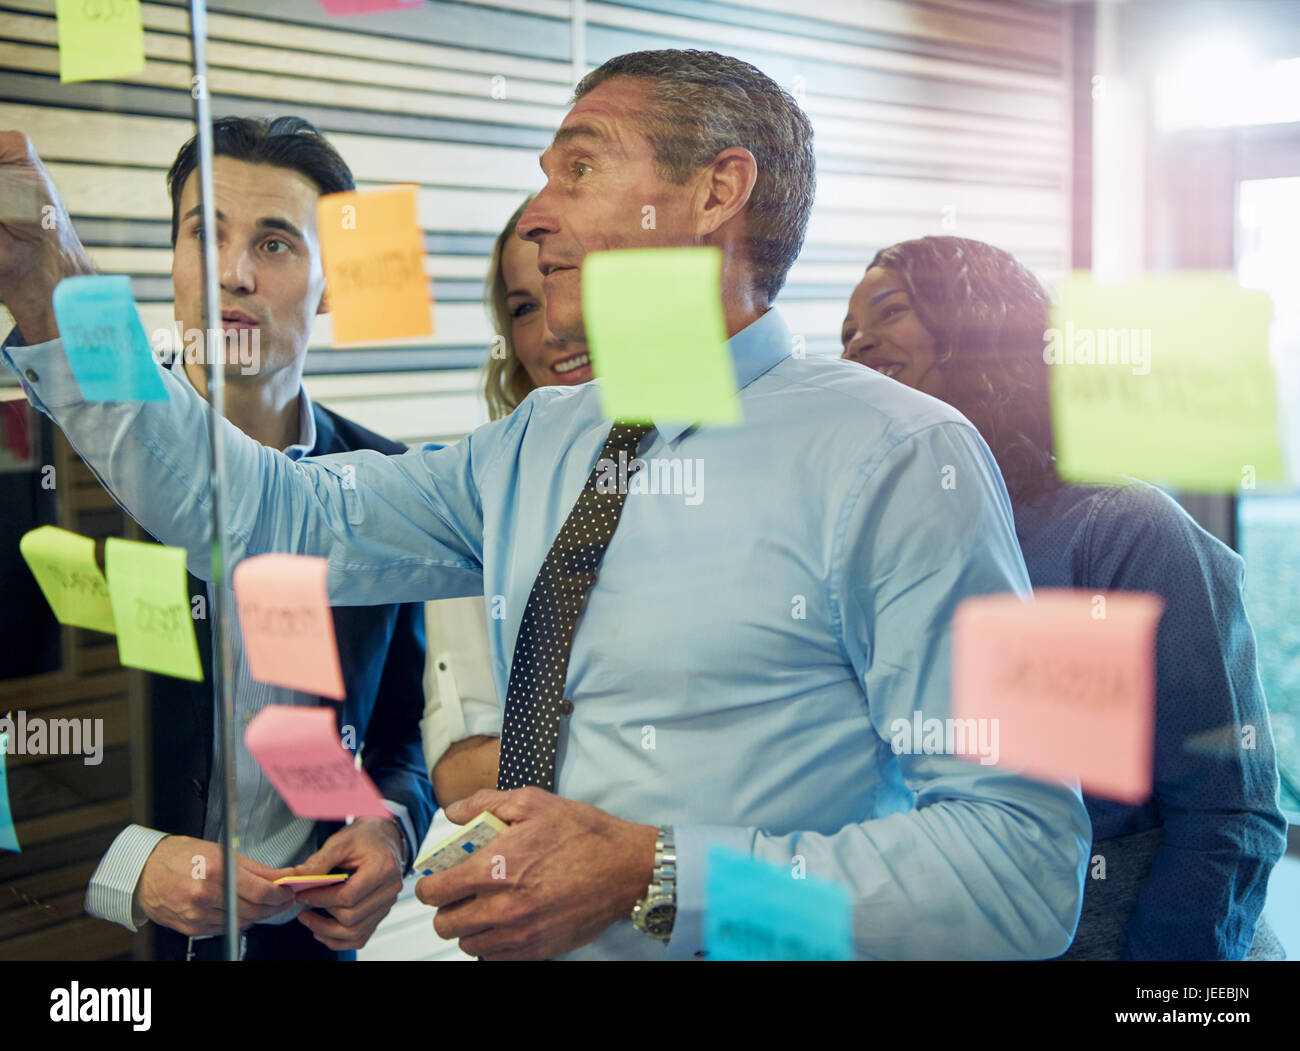 Half body portrait of businessman sticking note on glass, colleagues in background Stock Photo